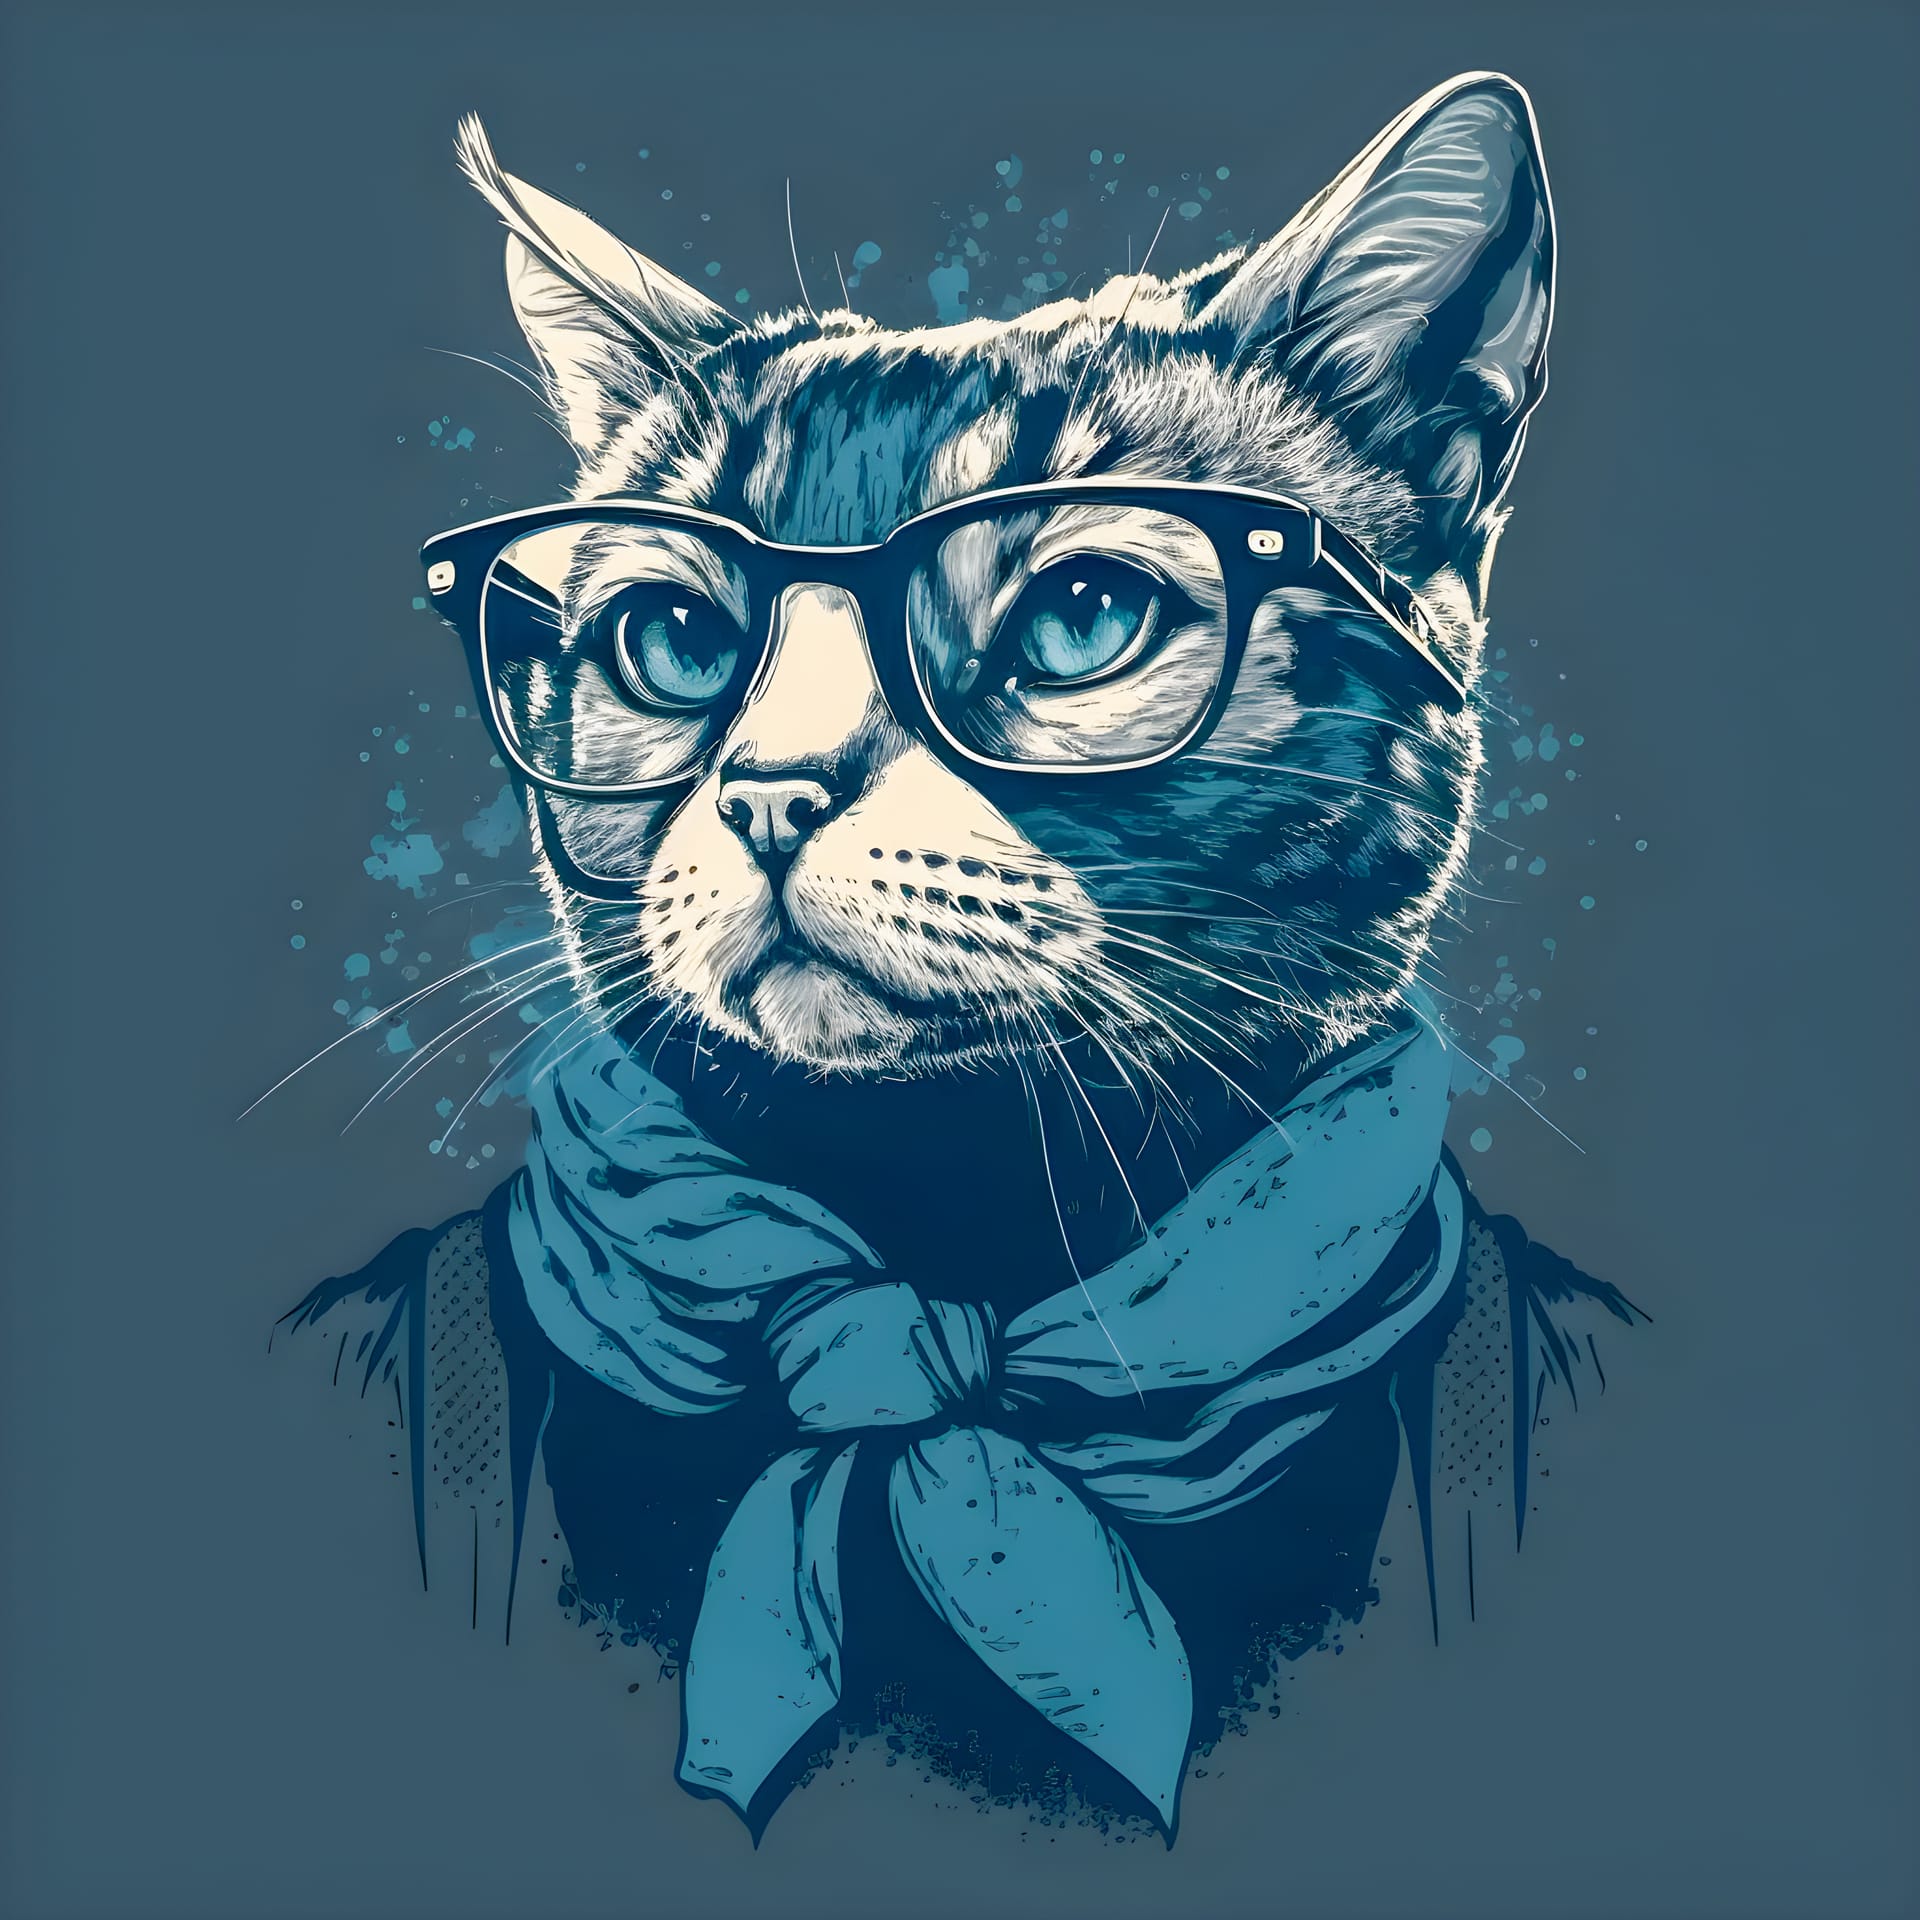 Hipster cute pop art cat illustration hand drawn fine picture